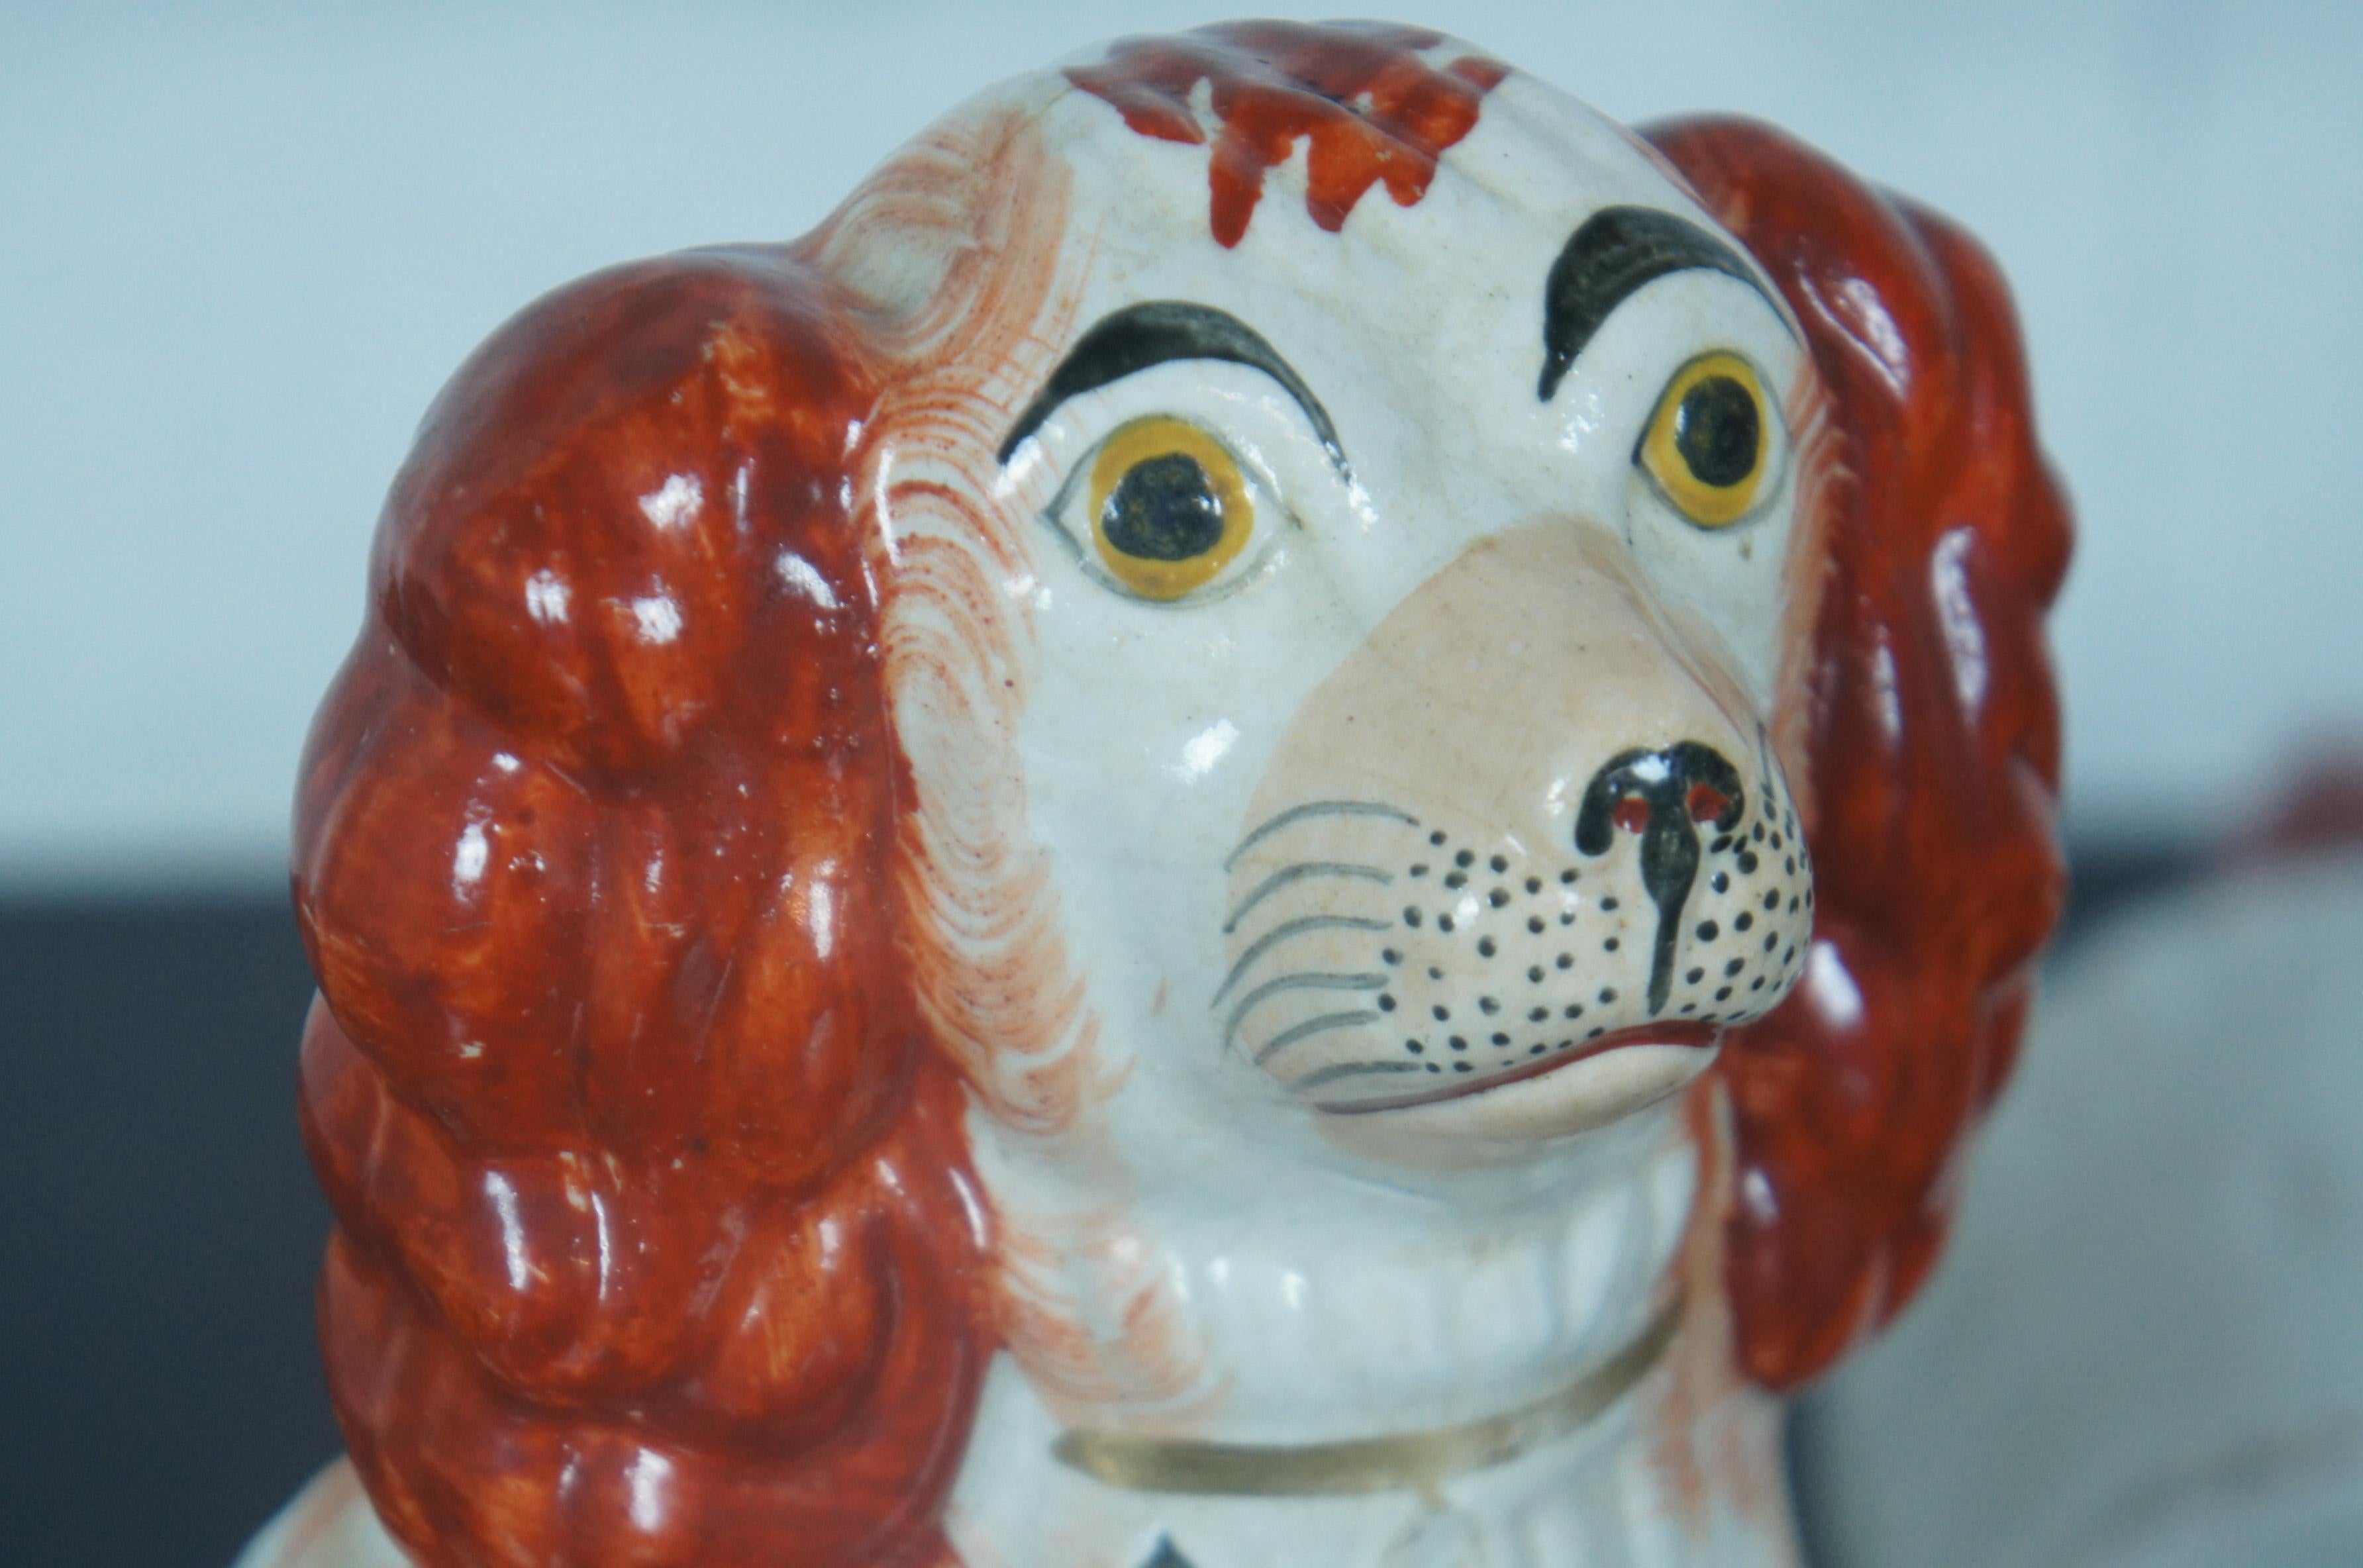 2 Antique English Staffordshire Porcelain King Charles Spaniels Figurines 2